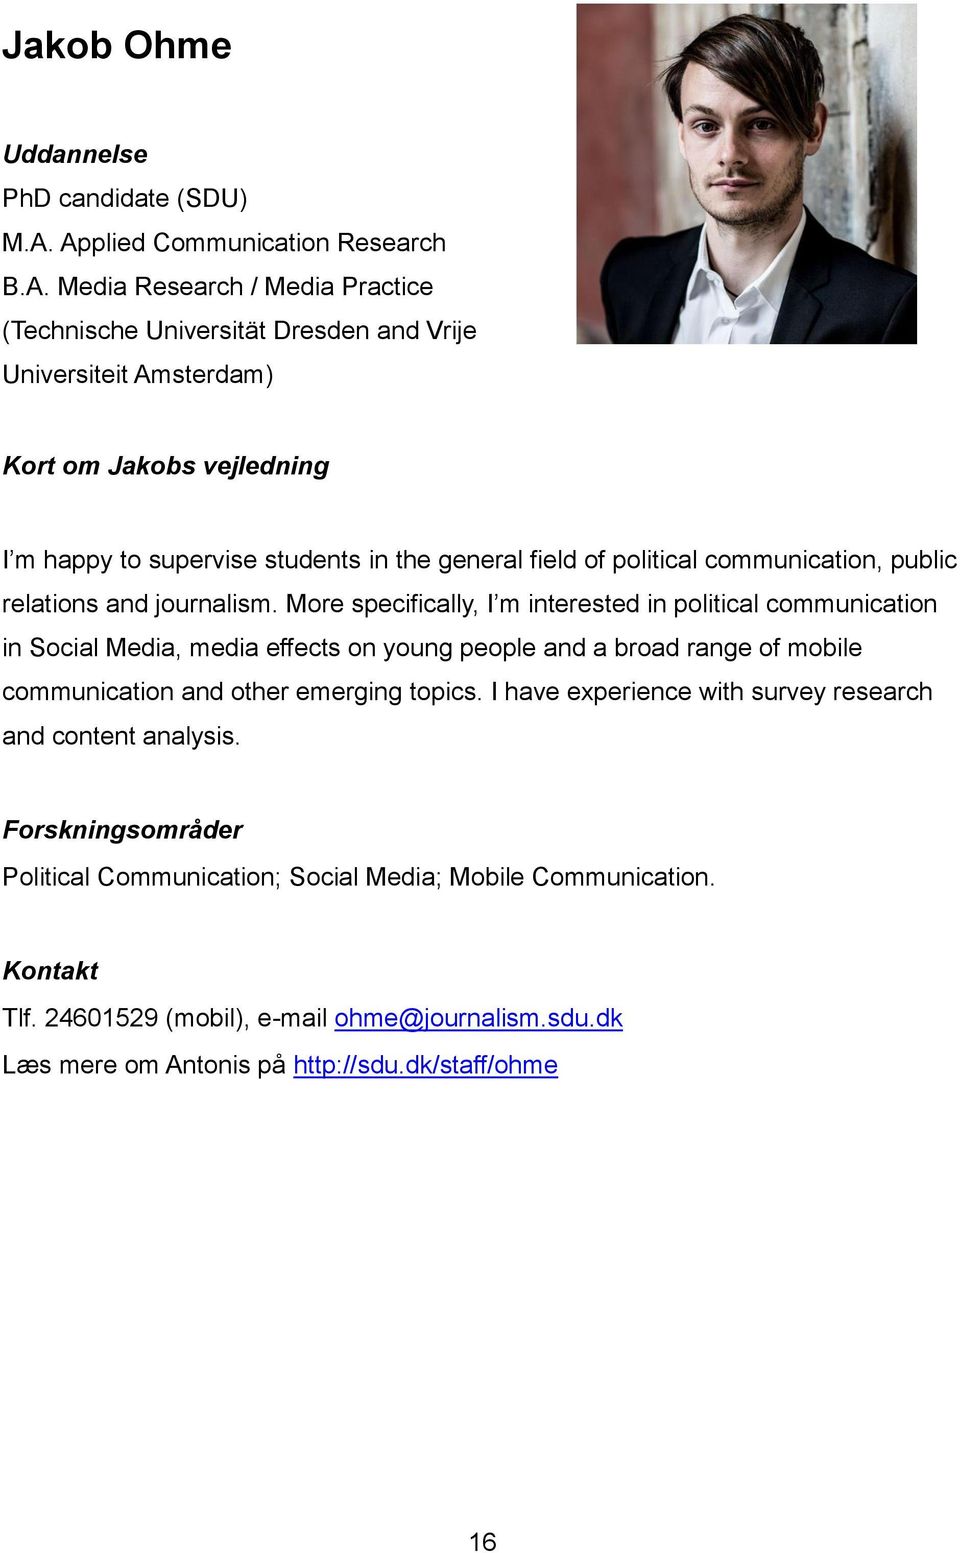 supervise students in the general field of political communication, public relations and journalism.